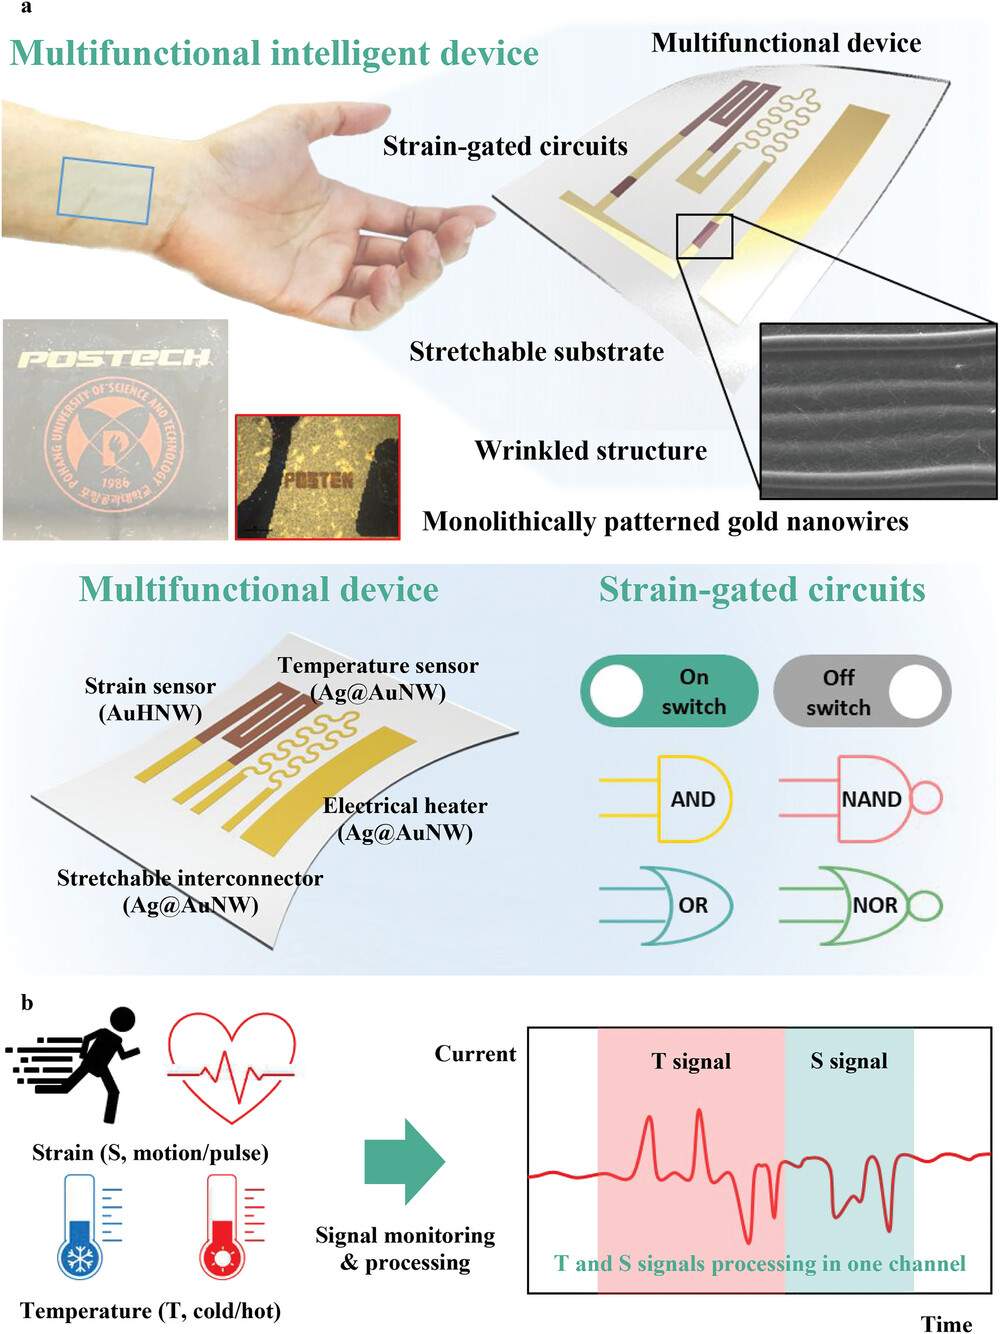 Schematic illustration for multifunctional intelligent wearable devices